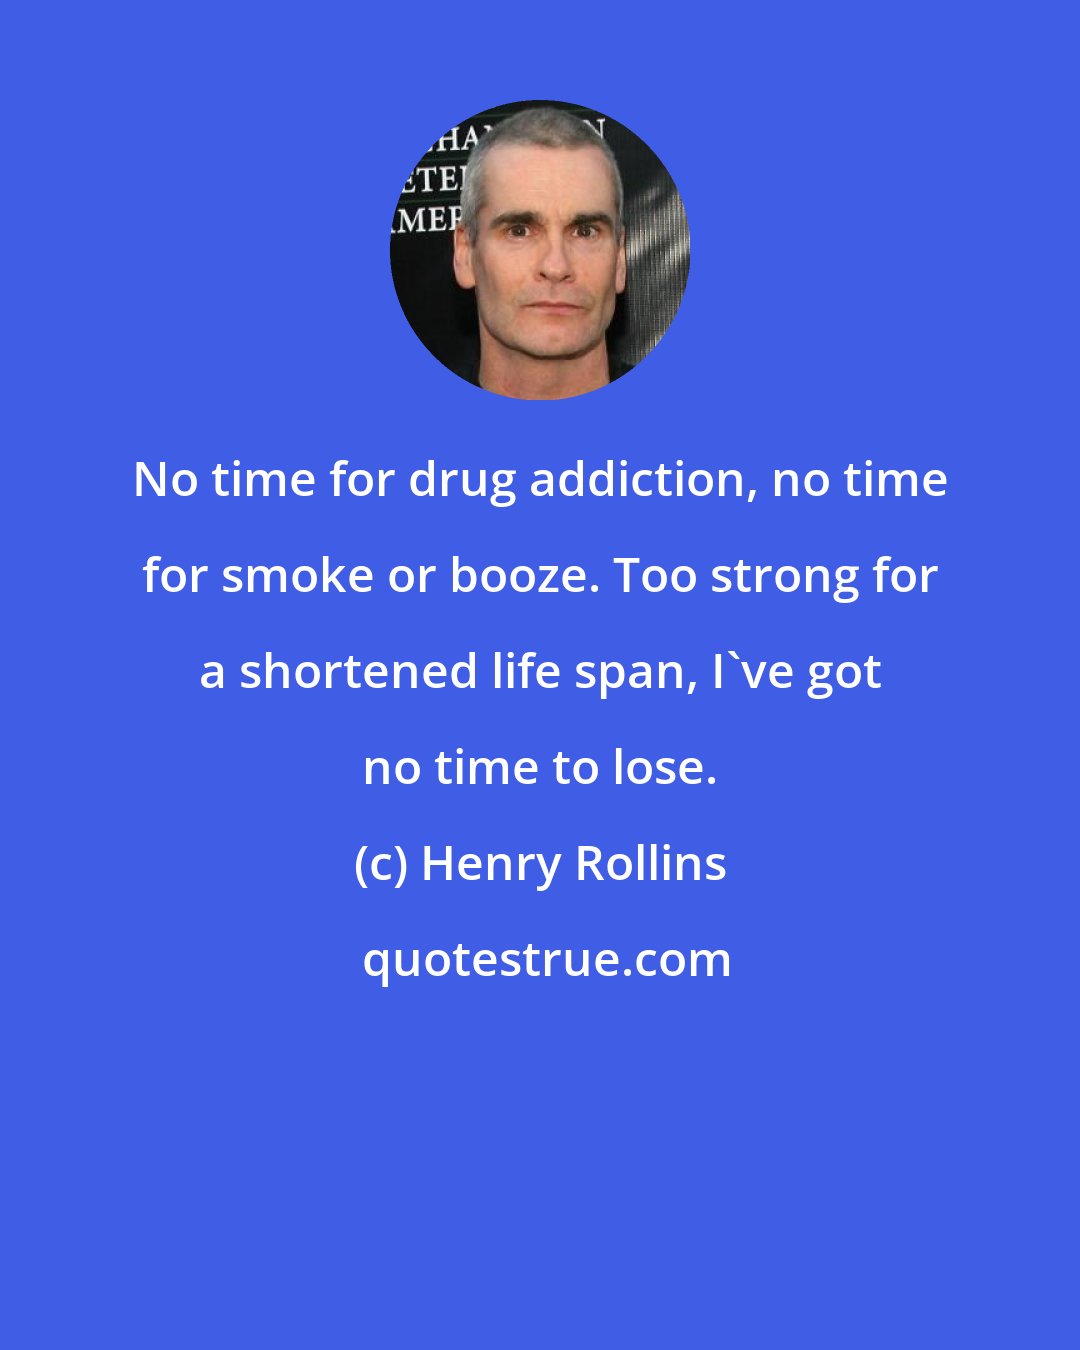 Henry Rollins: No time for drug addiction, no time for smoke or booze. Too strong for a shortened life span, I've got no time to lose.